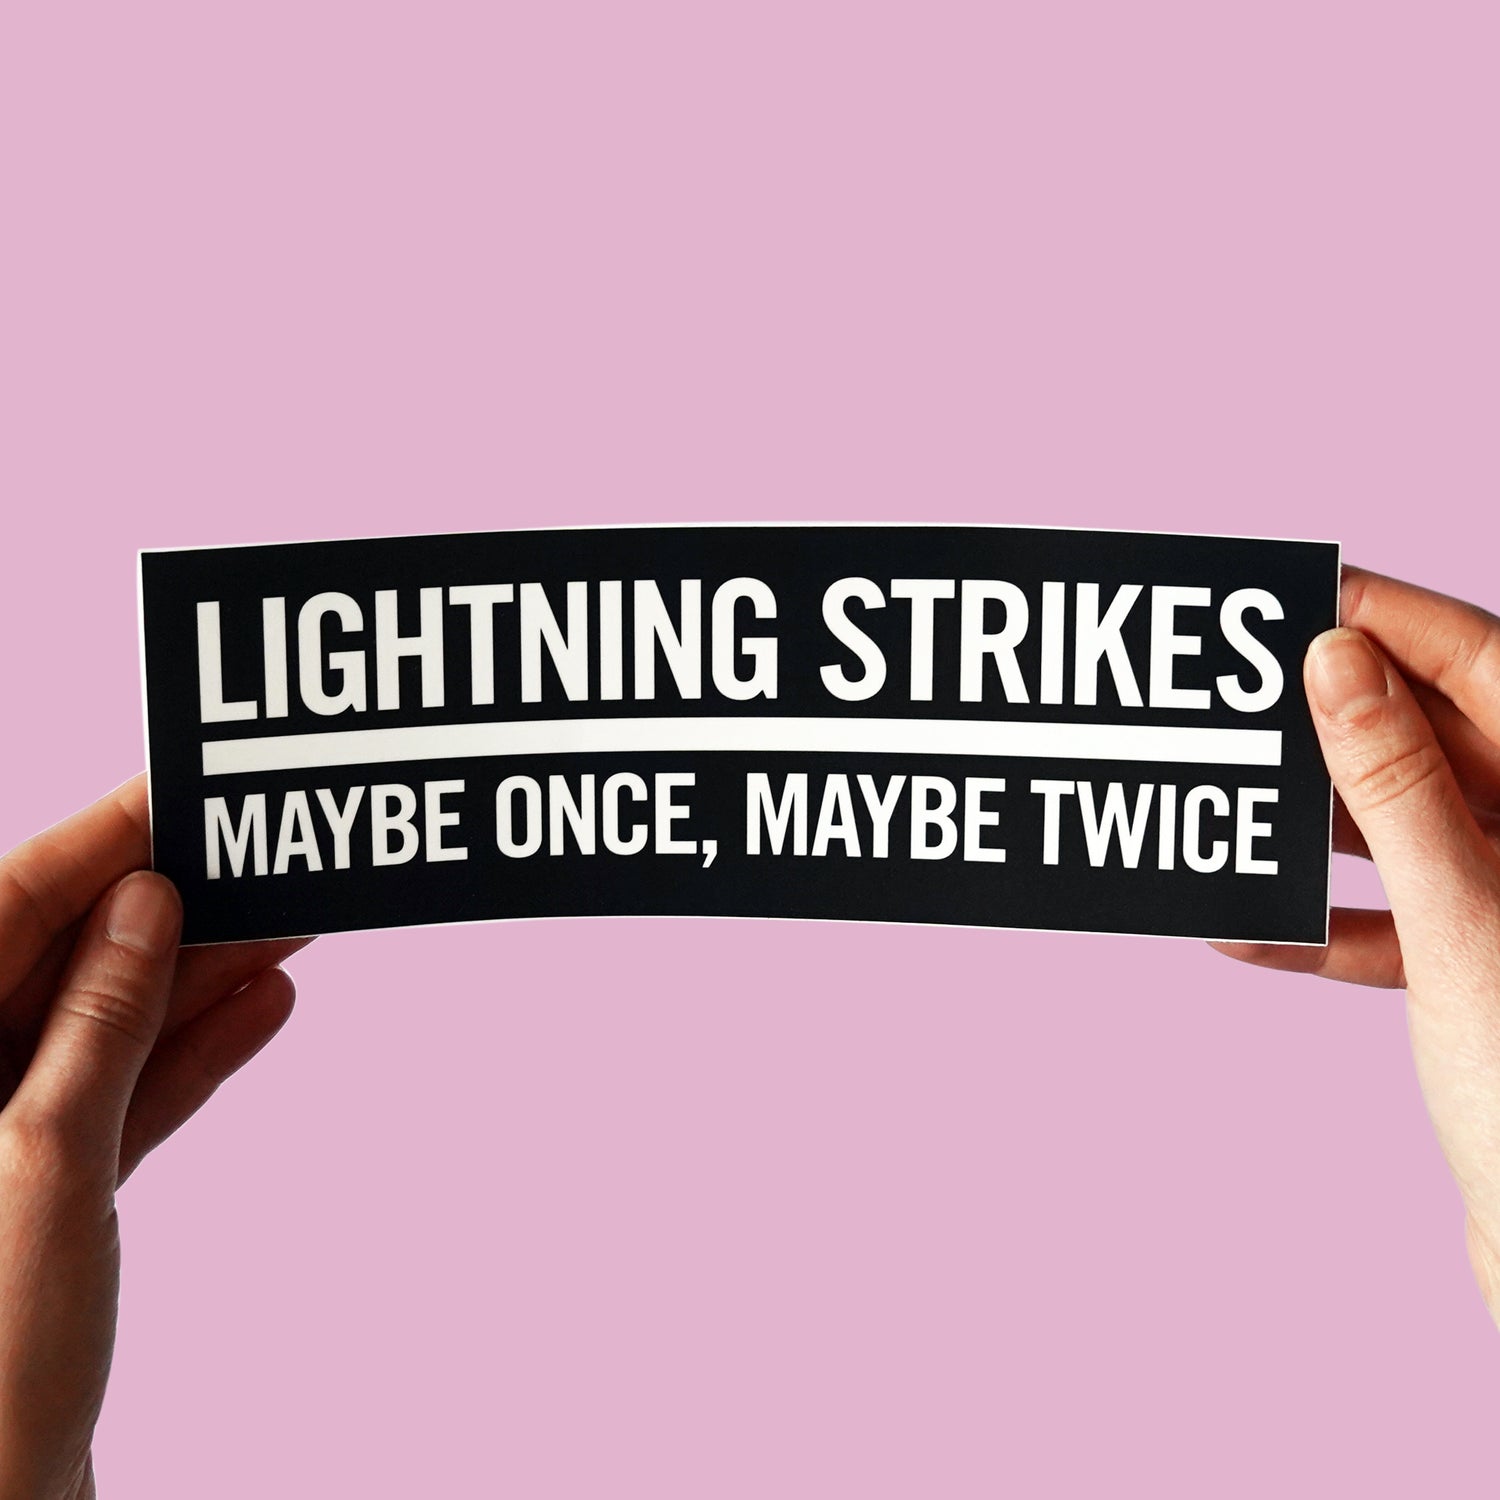 Fleetwood Mac inspired bumper sticker  "Lightning strikes maybe once, maybe twice" held with purple background